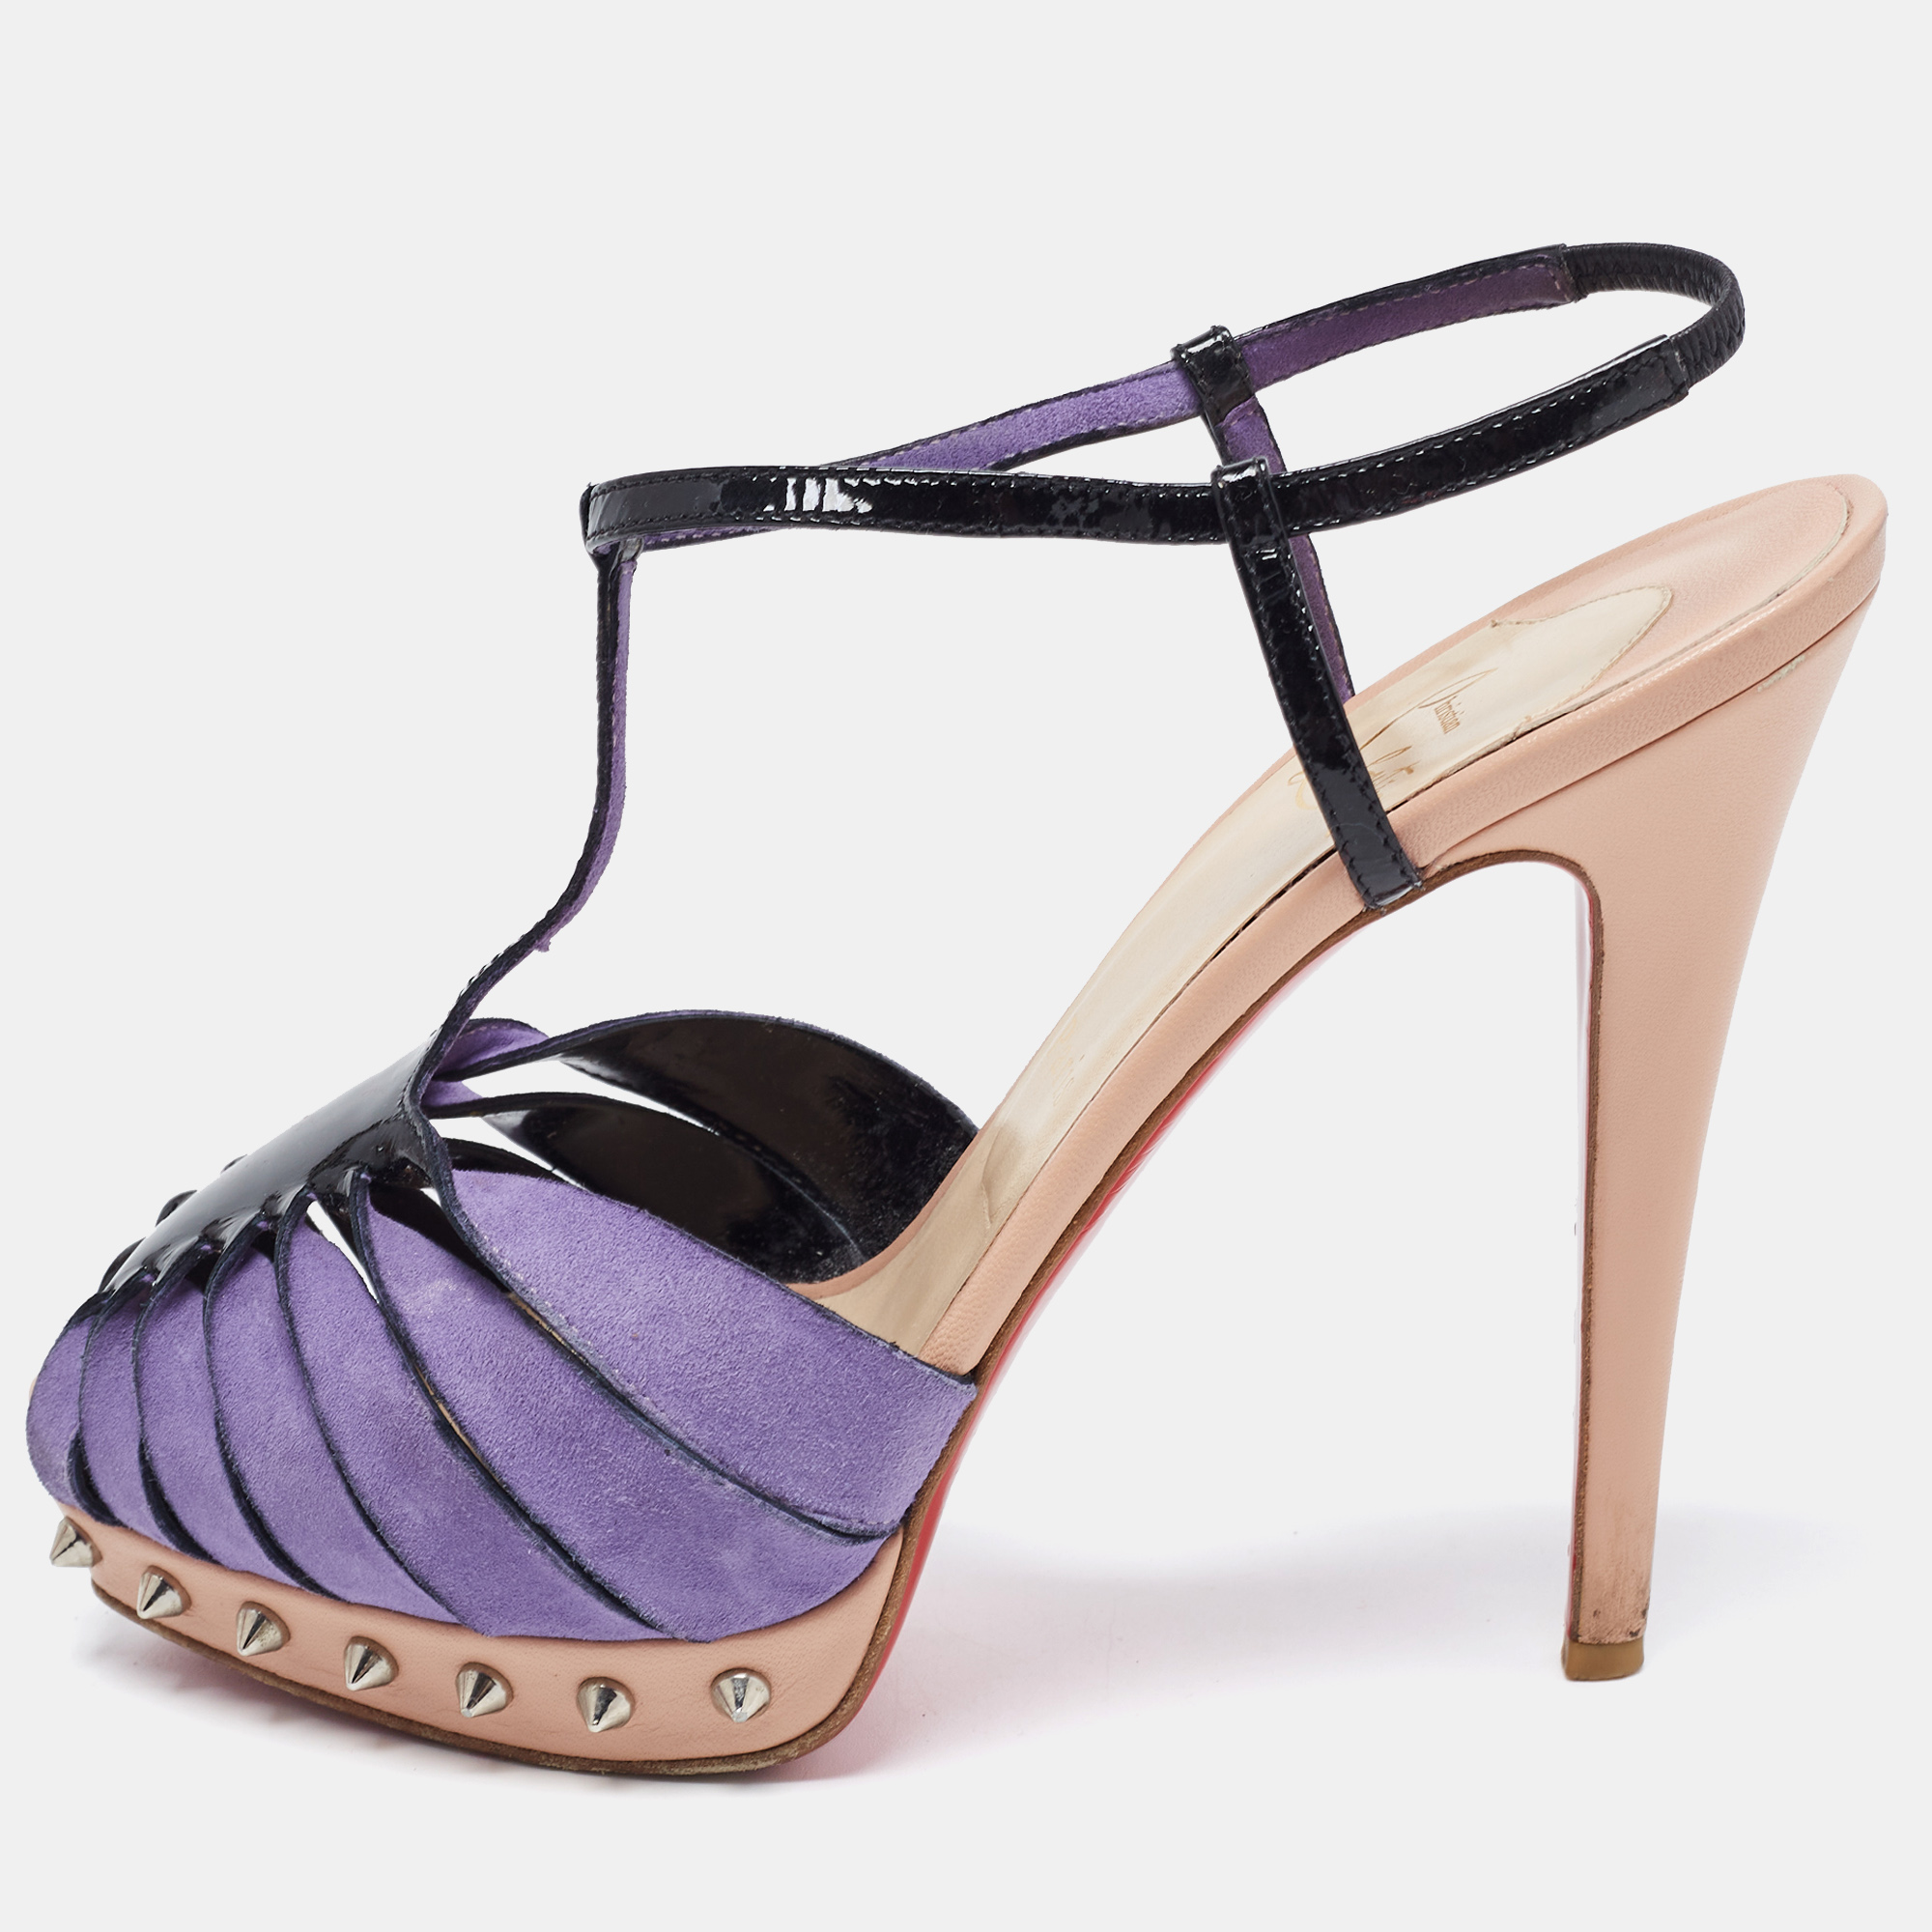 

Christian Louboutin Purple/Black Suede and Patent Leather Zigounette Spiked Slingback Sandals Size